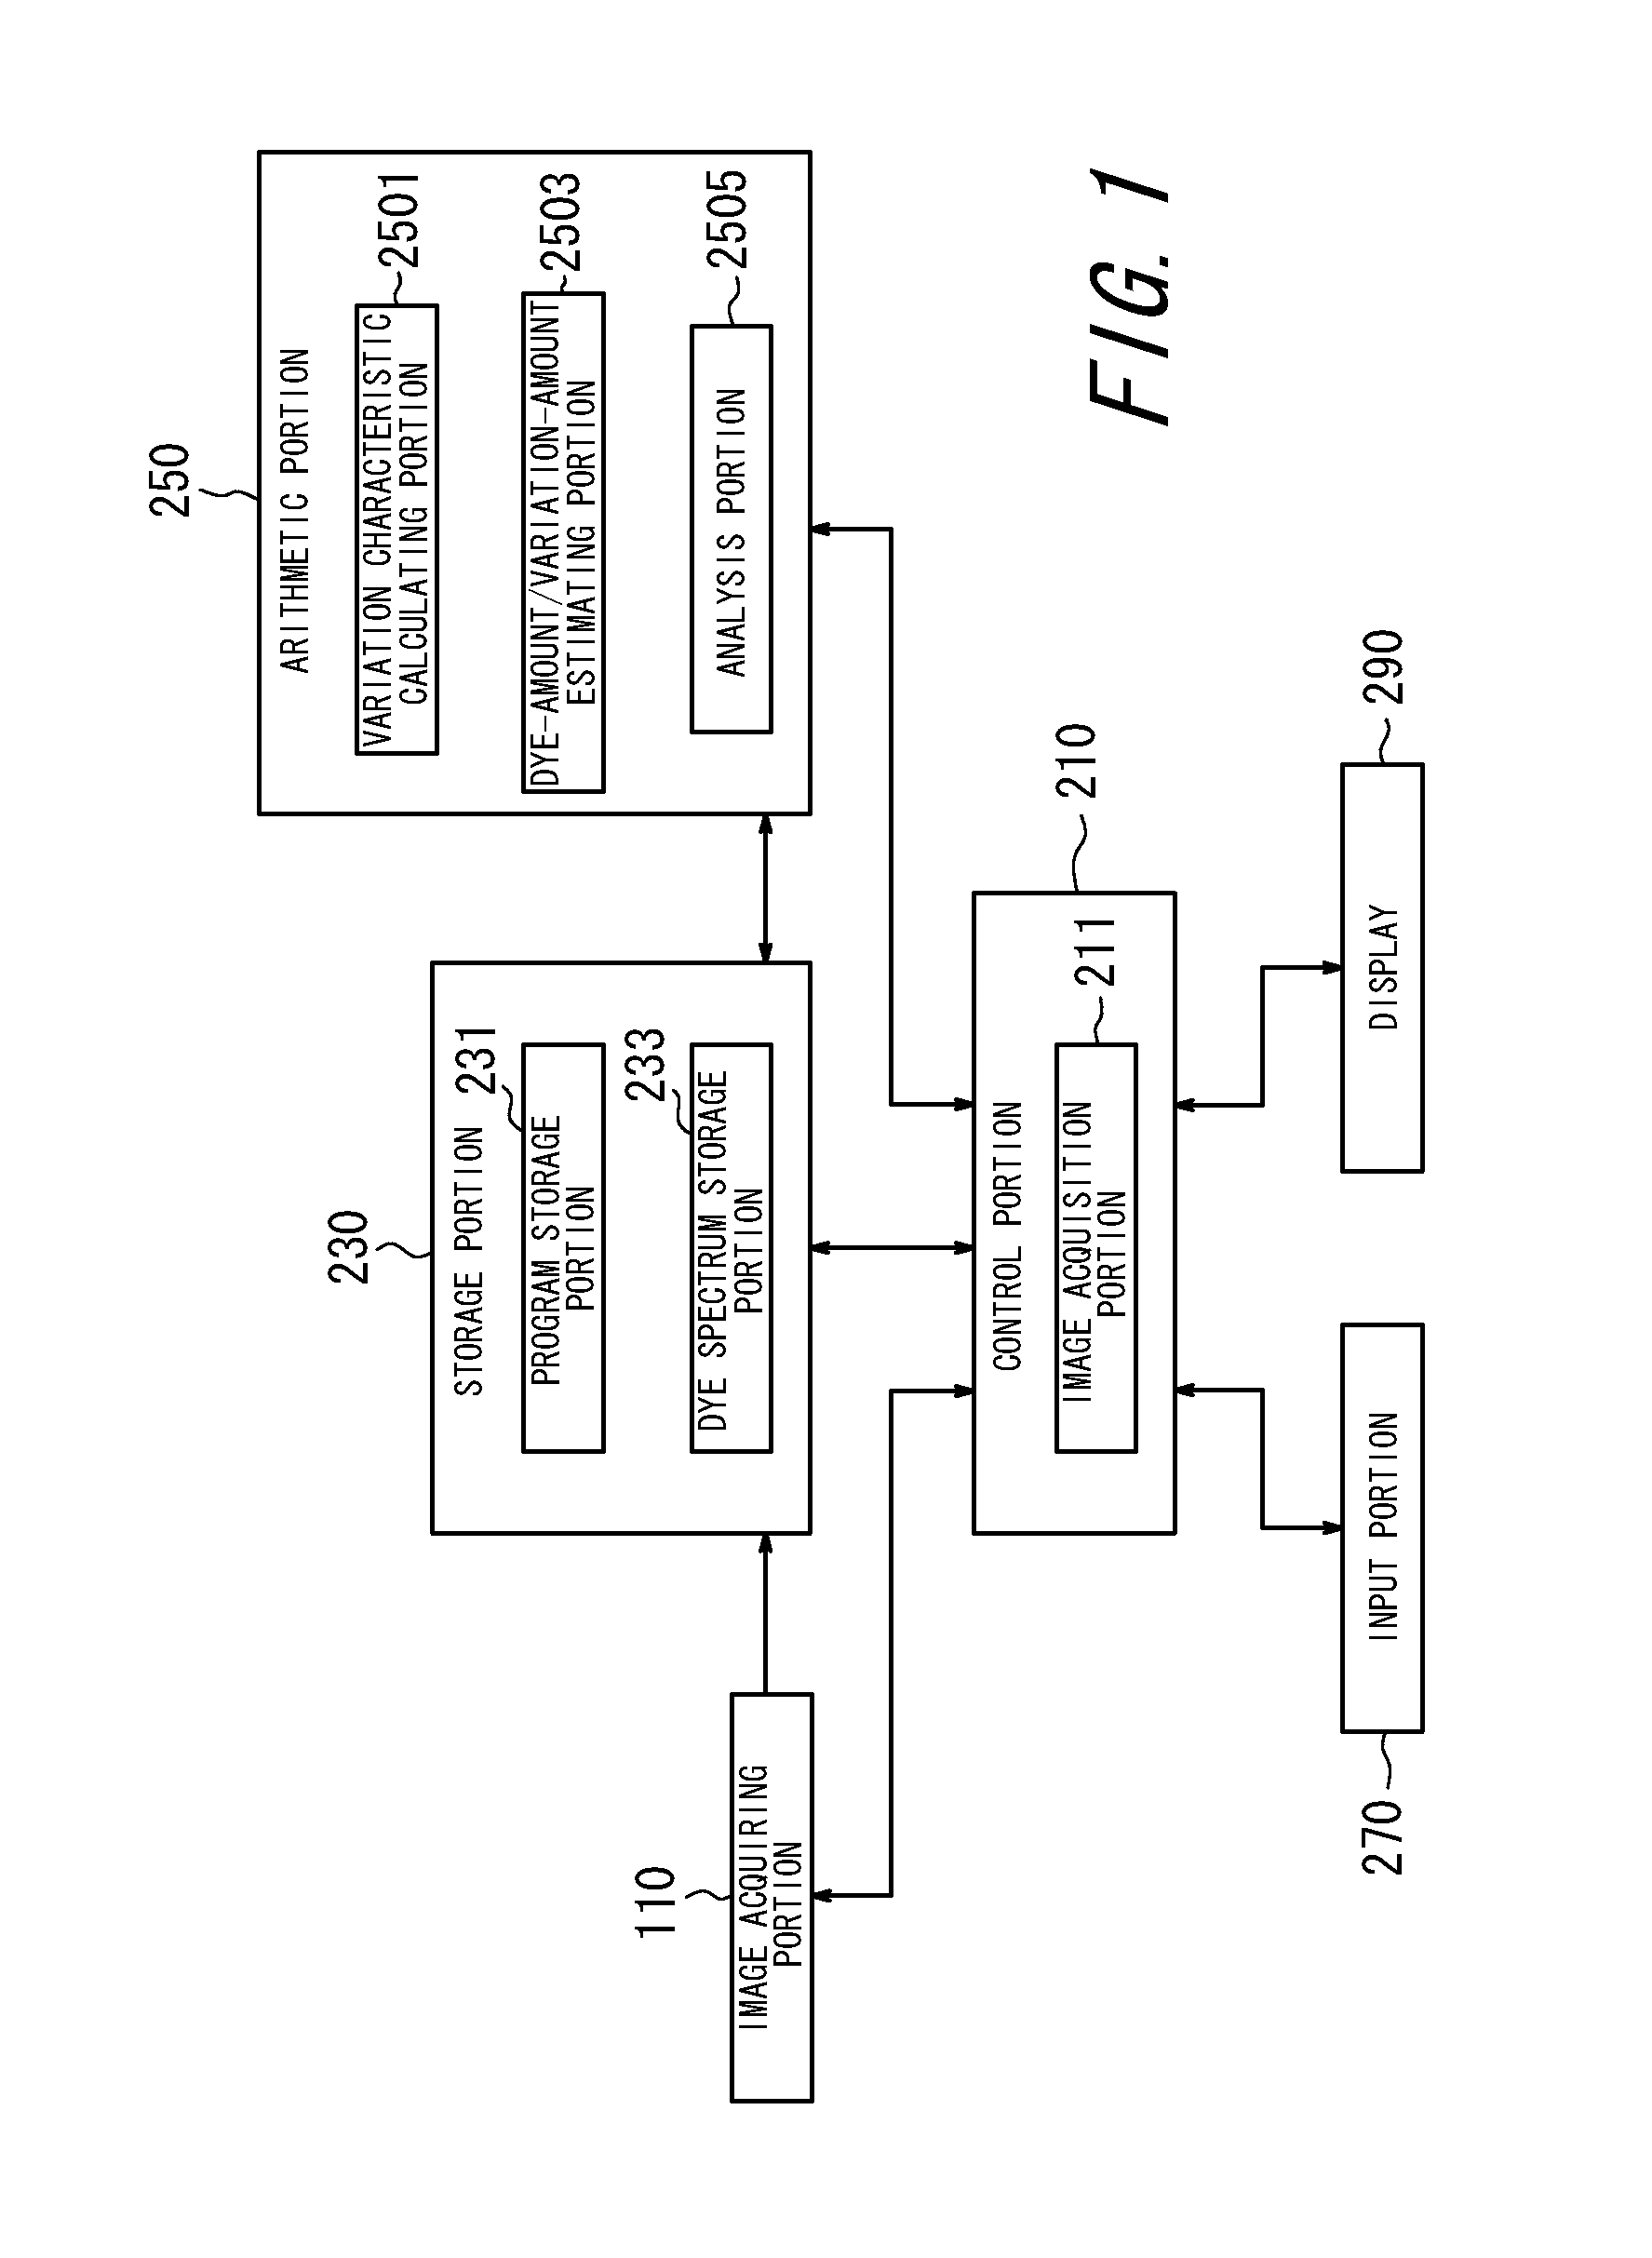 Image processing apparatus, image processing method, image processing program, and virtual microscope system